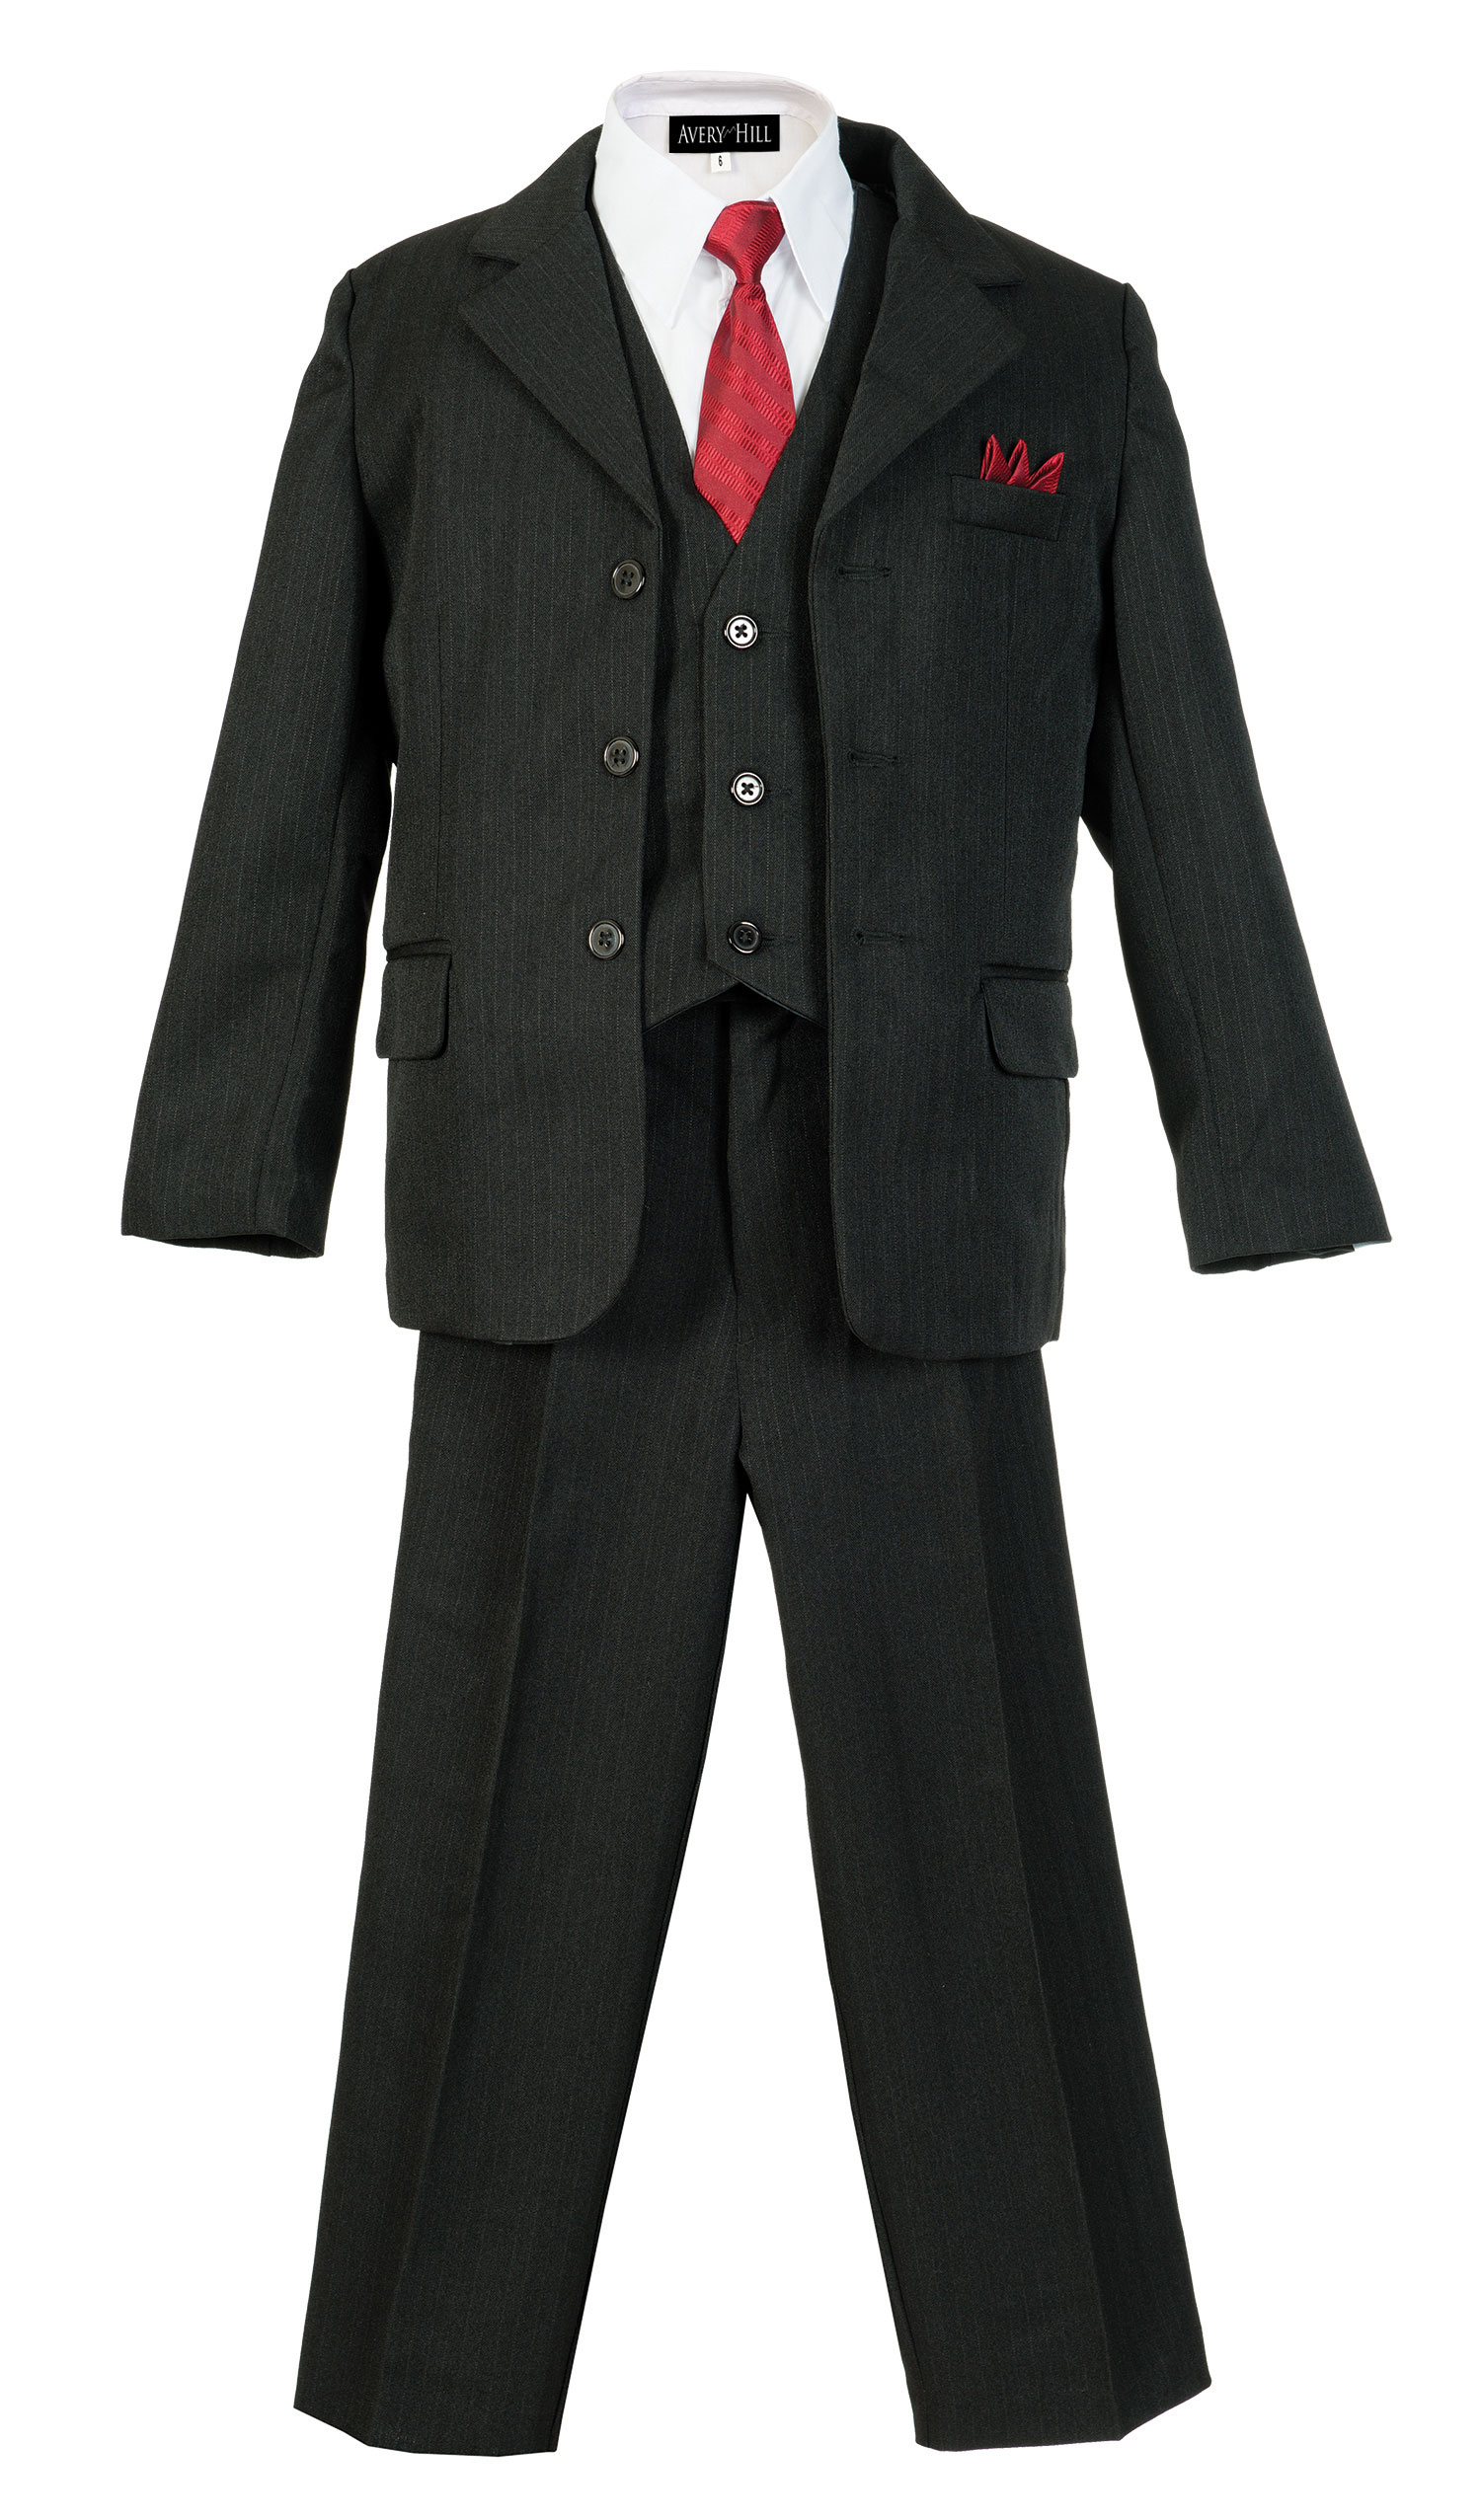 Boys Pinstripe Suit Set with Matching Tie BK 2T